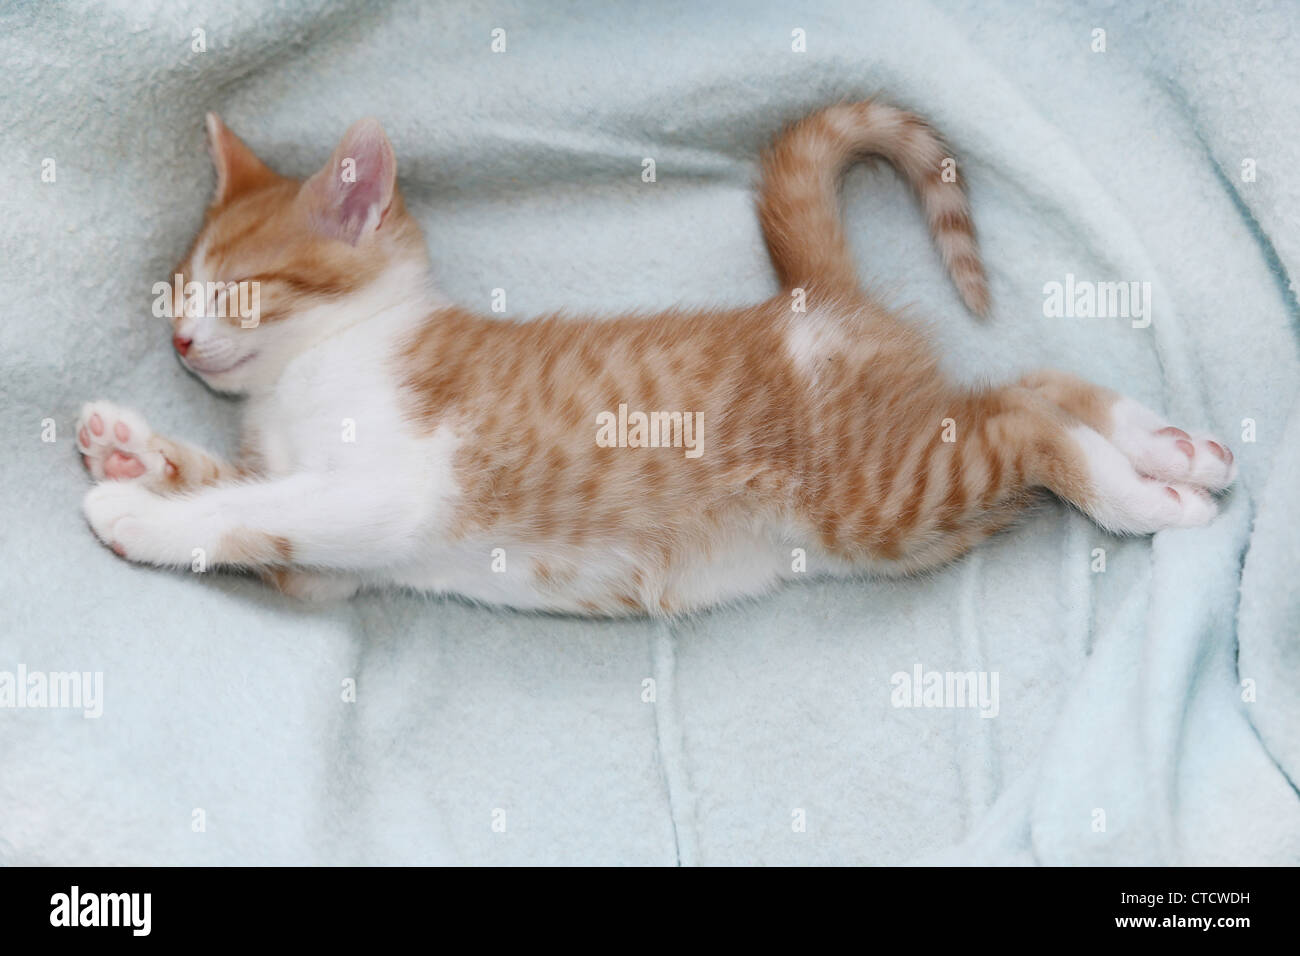 Ginger And White Kitten Stretched Out Asleep In Cat Basket Stock Photo